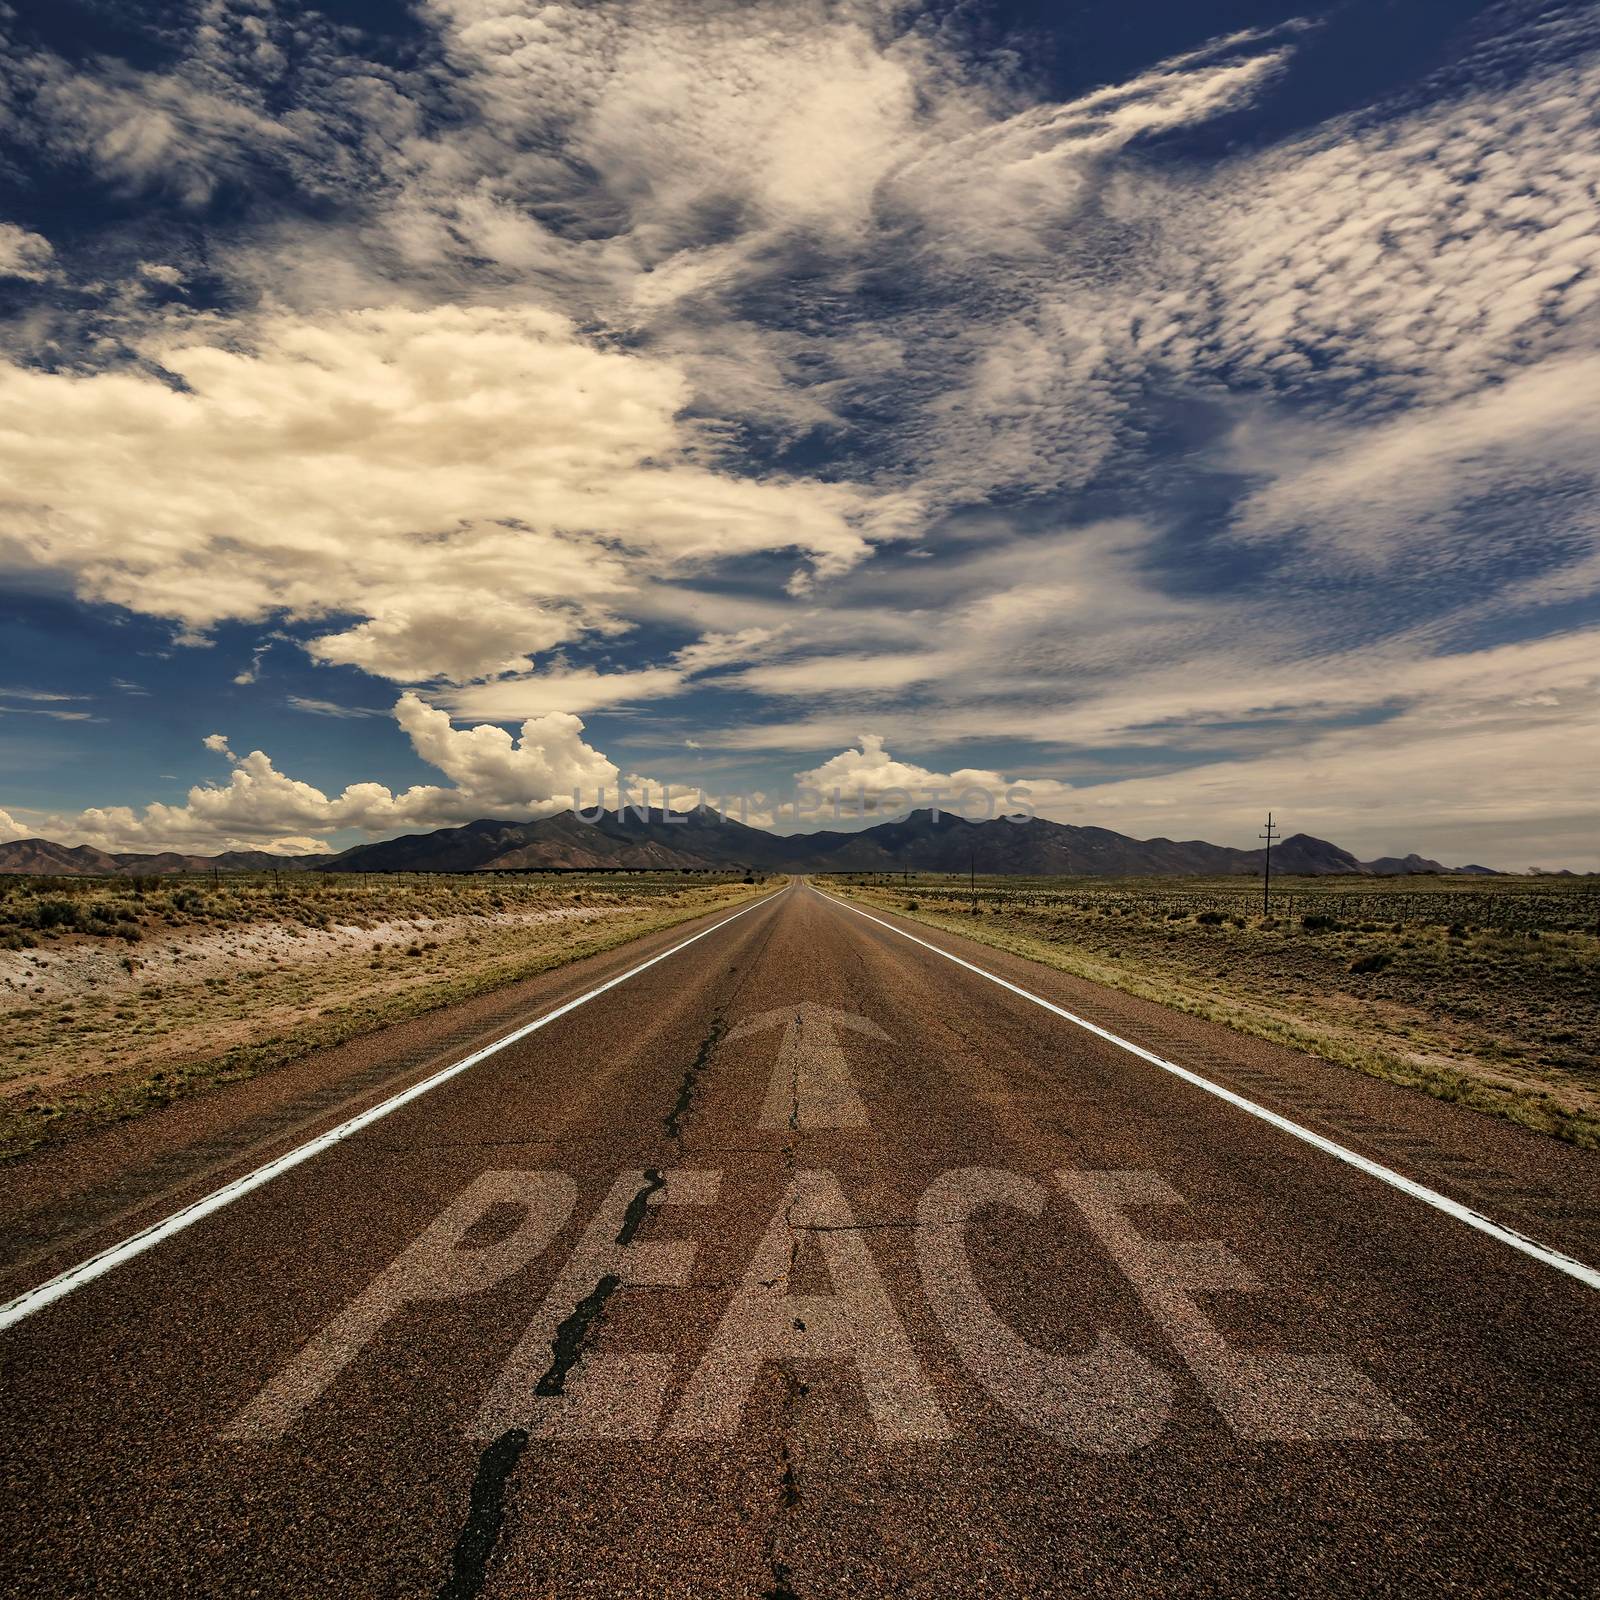 Concept of peace as a word on desert highway